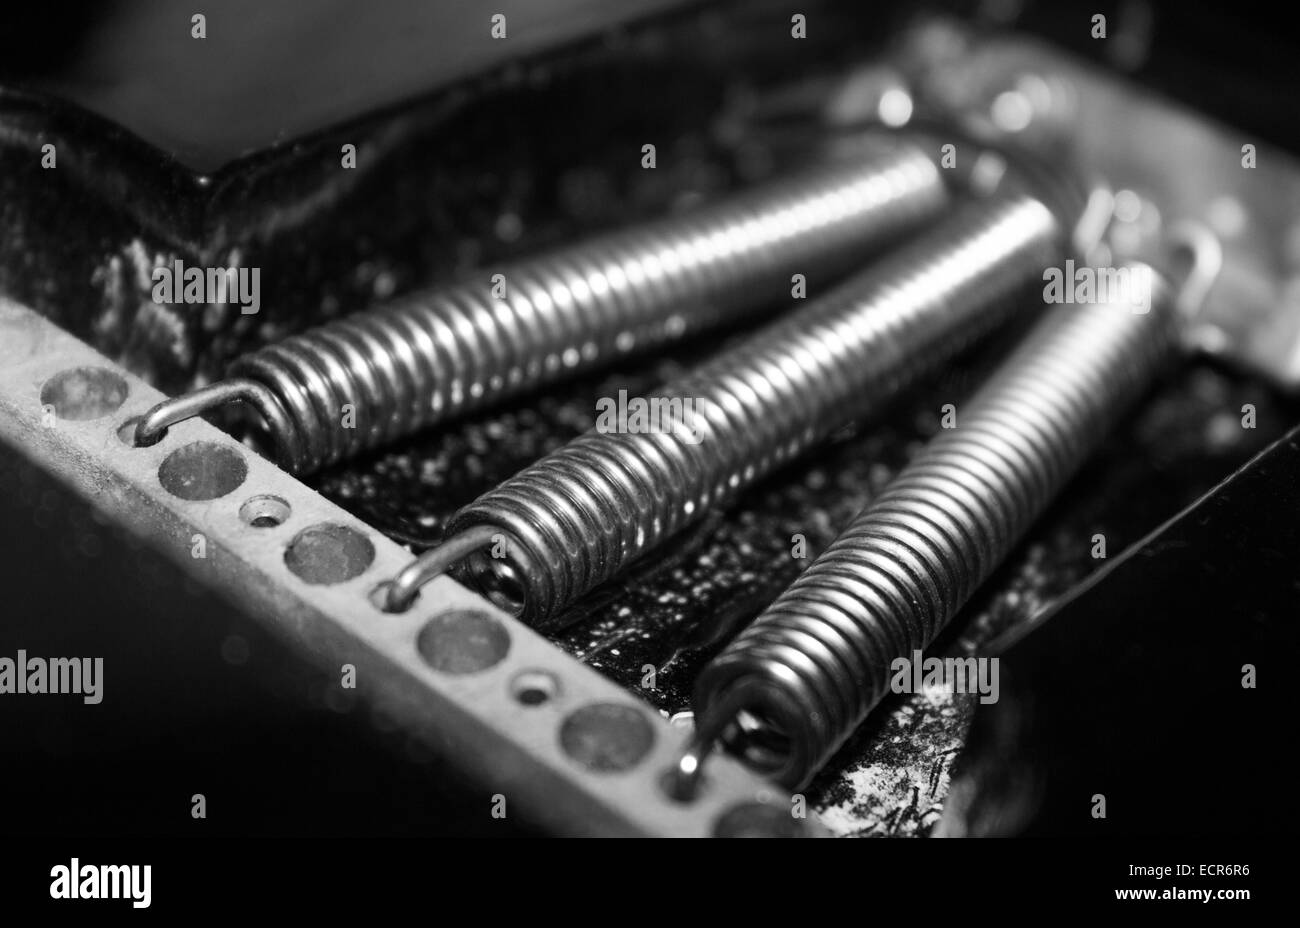 Inside the back of a dusty Fender Stratocaster guitar showing the springs/ coils. Stock Photo